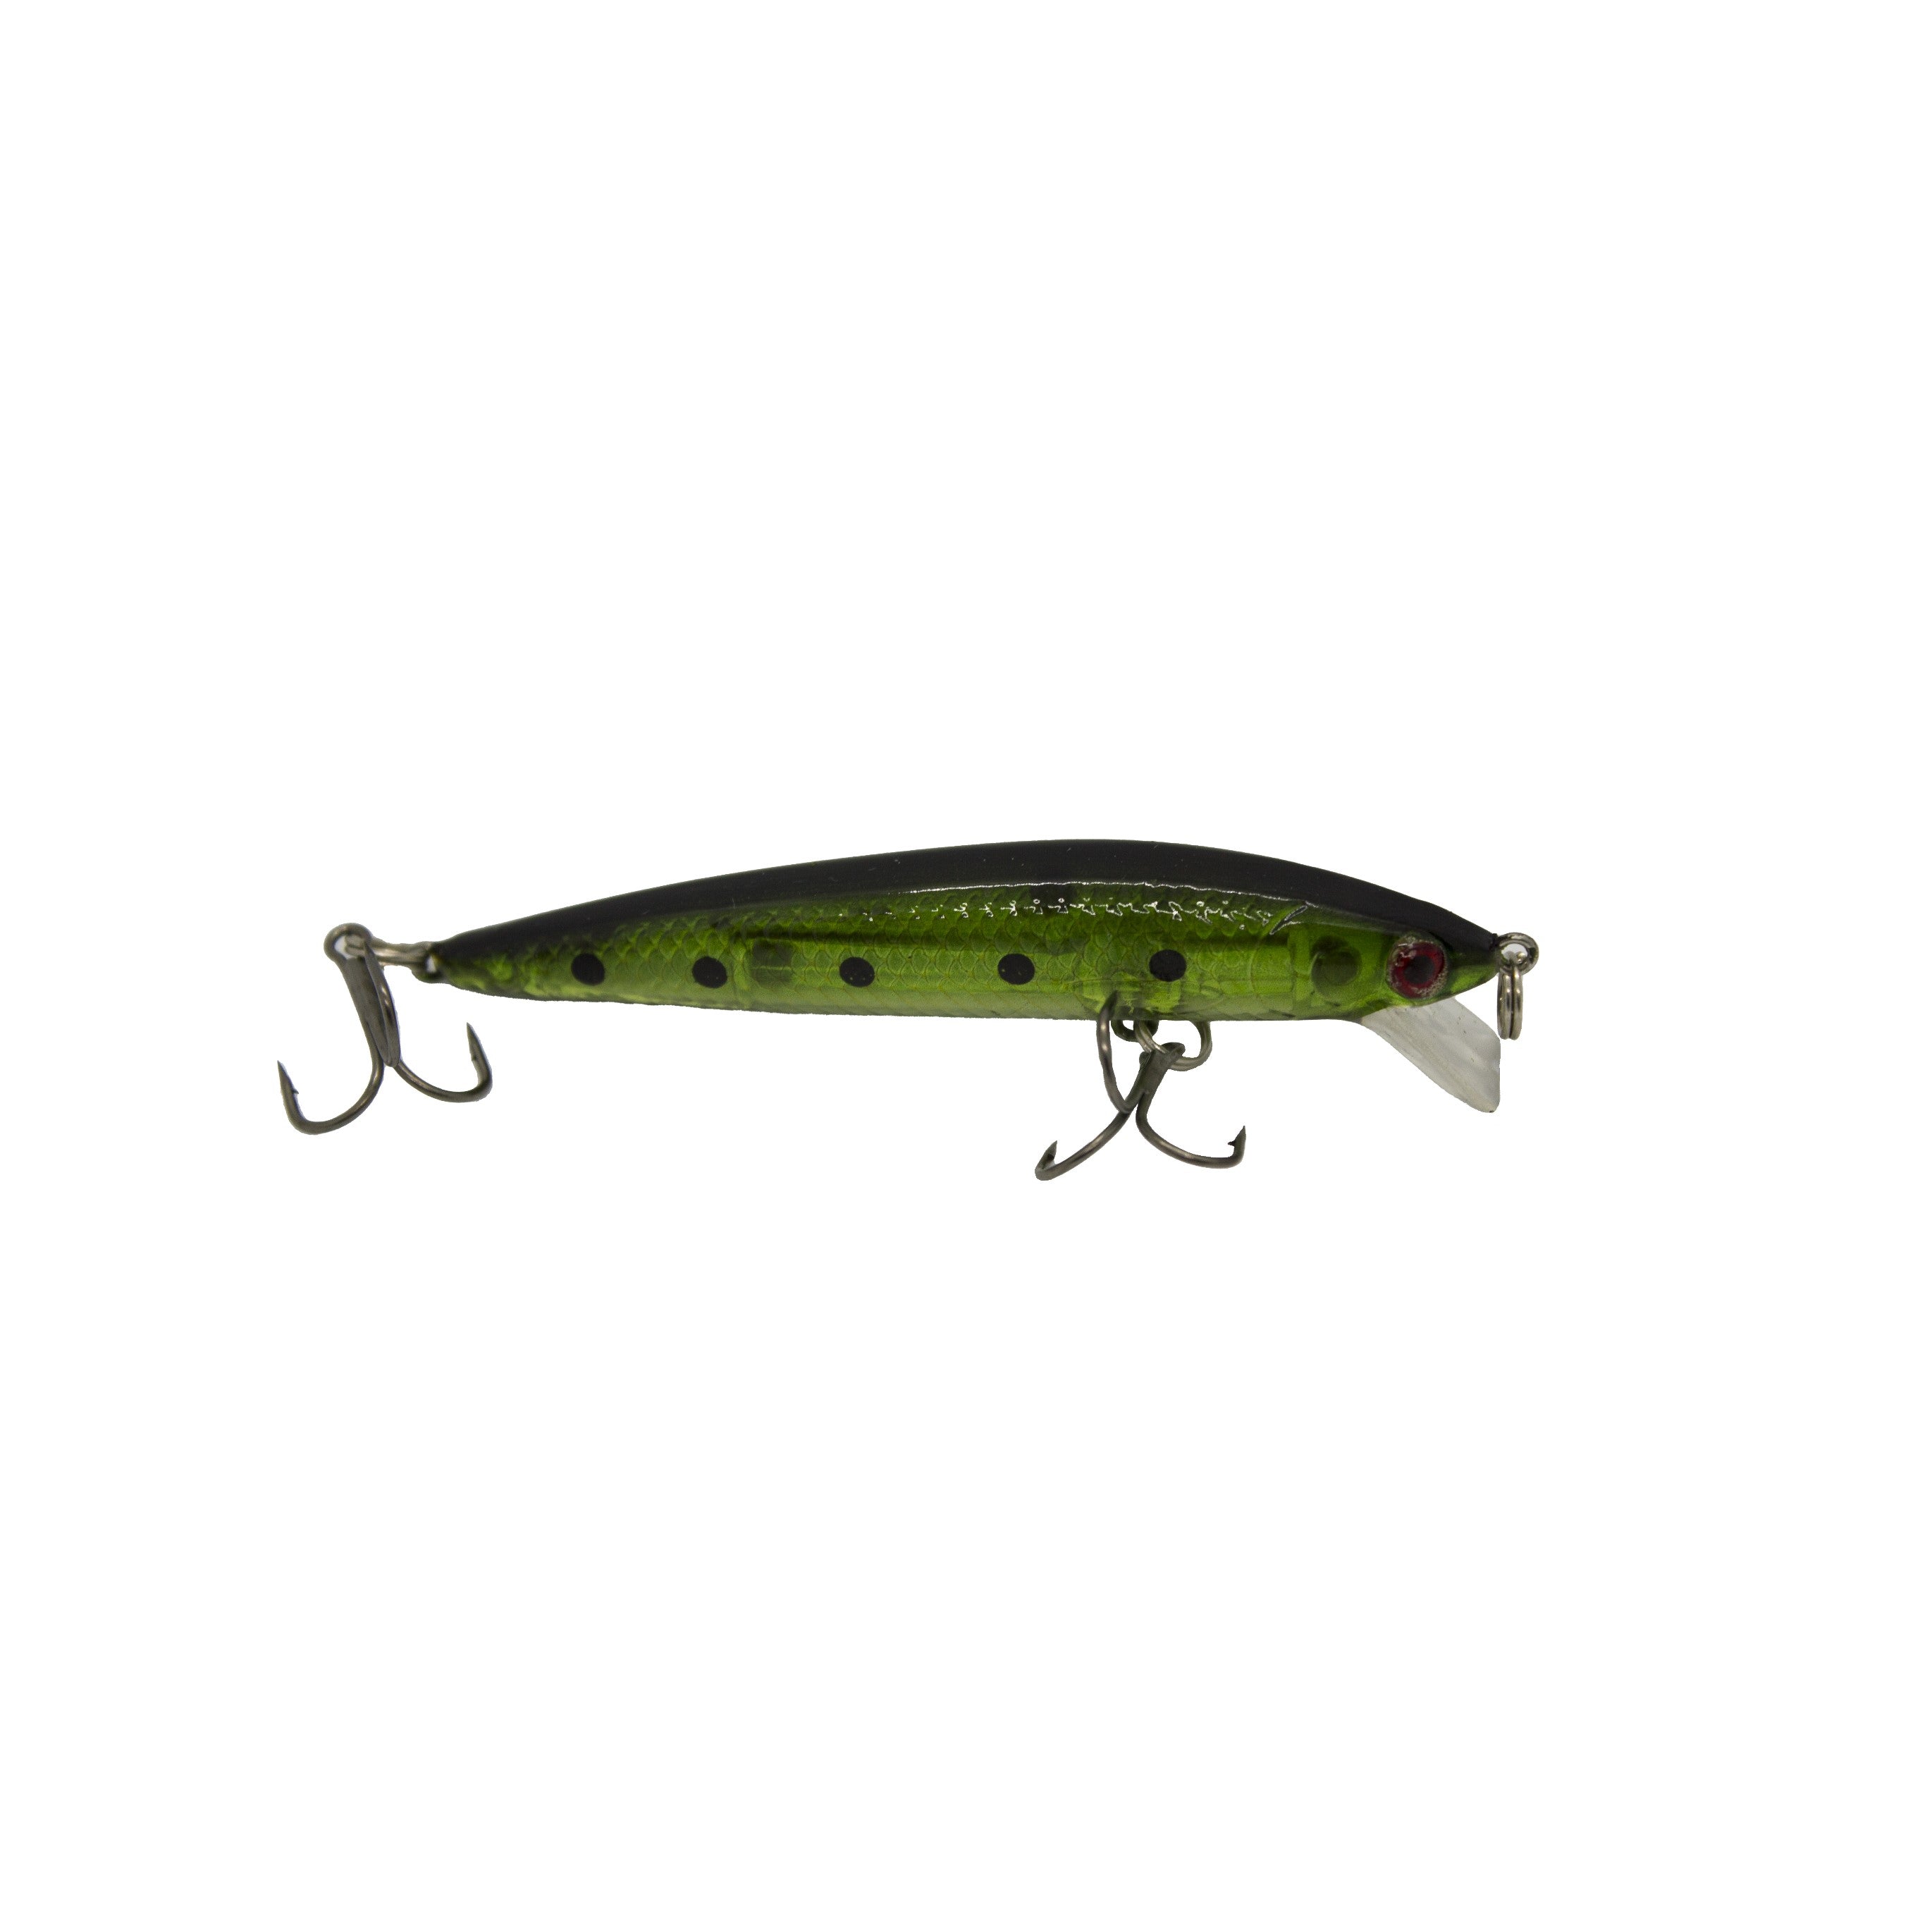  Fishing Tackle - $200 & Above: Sports & Outdoors